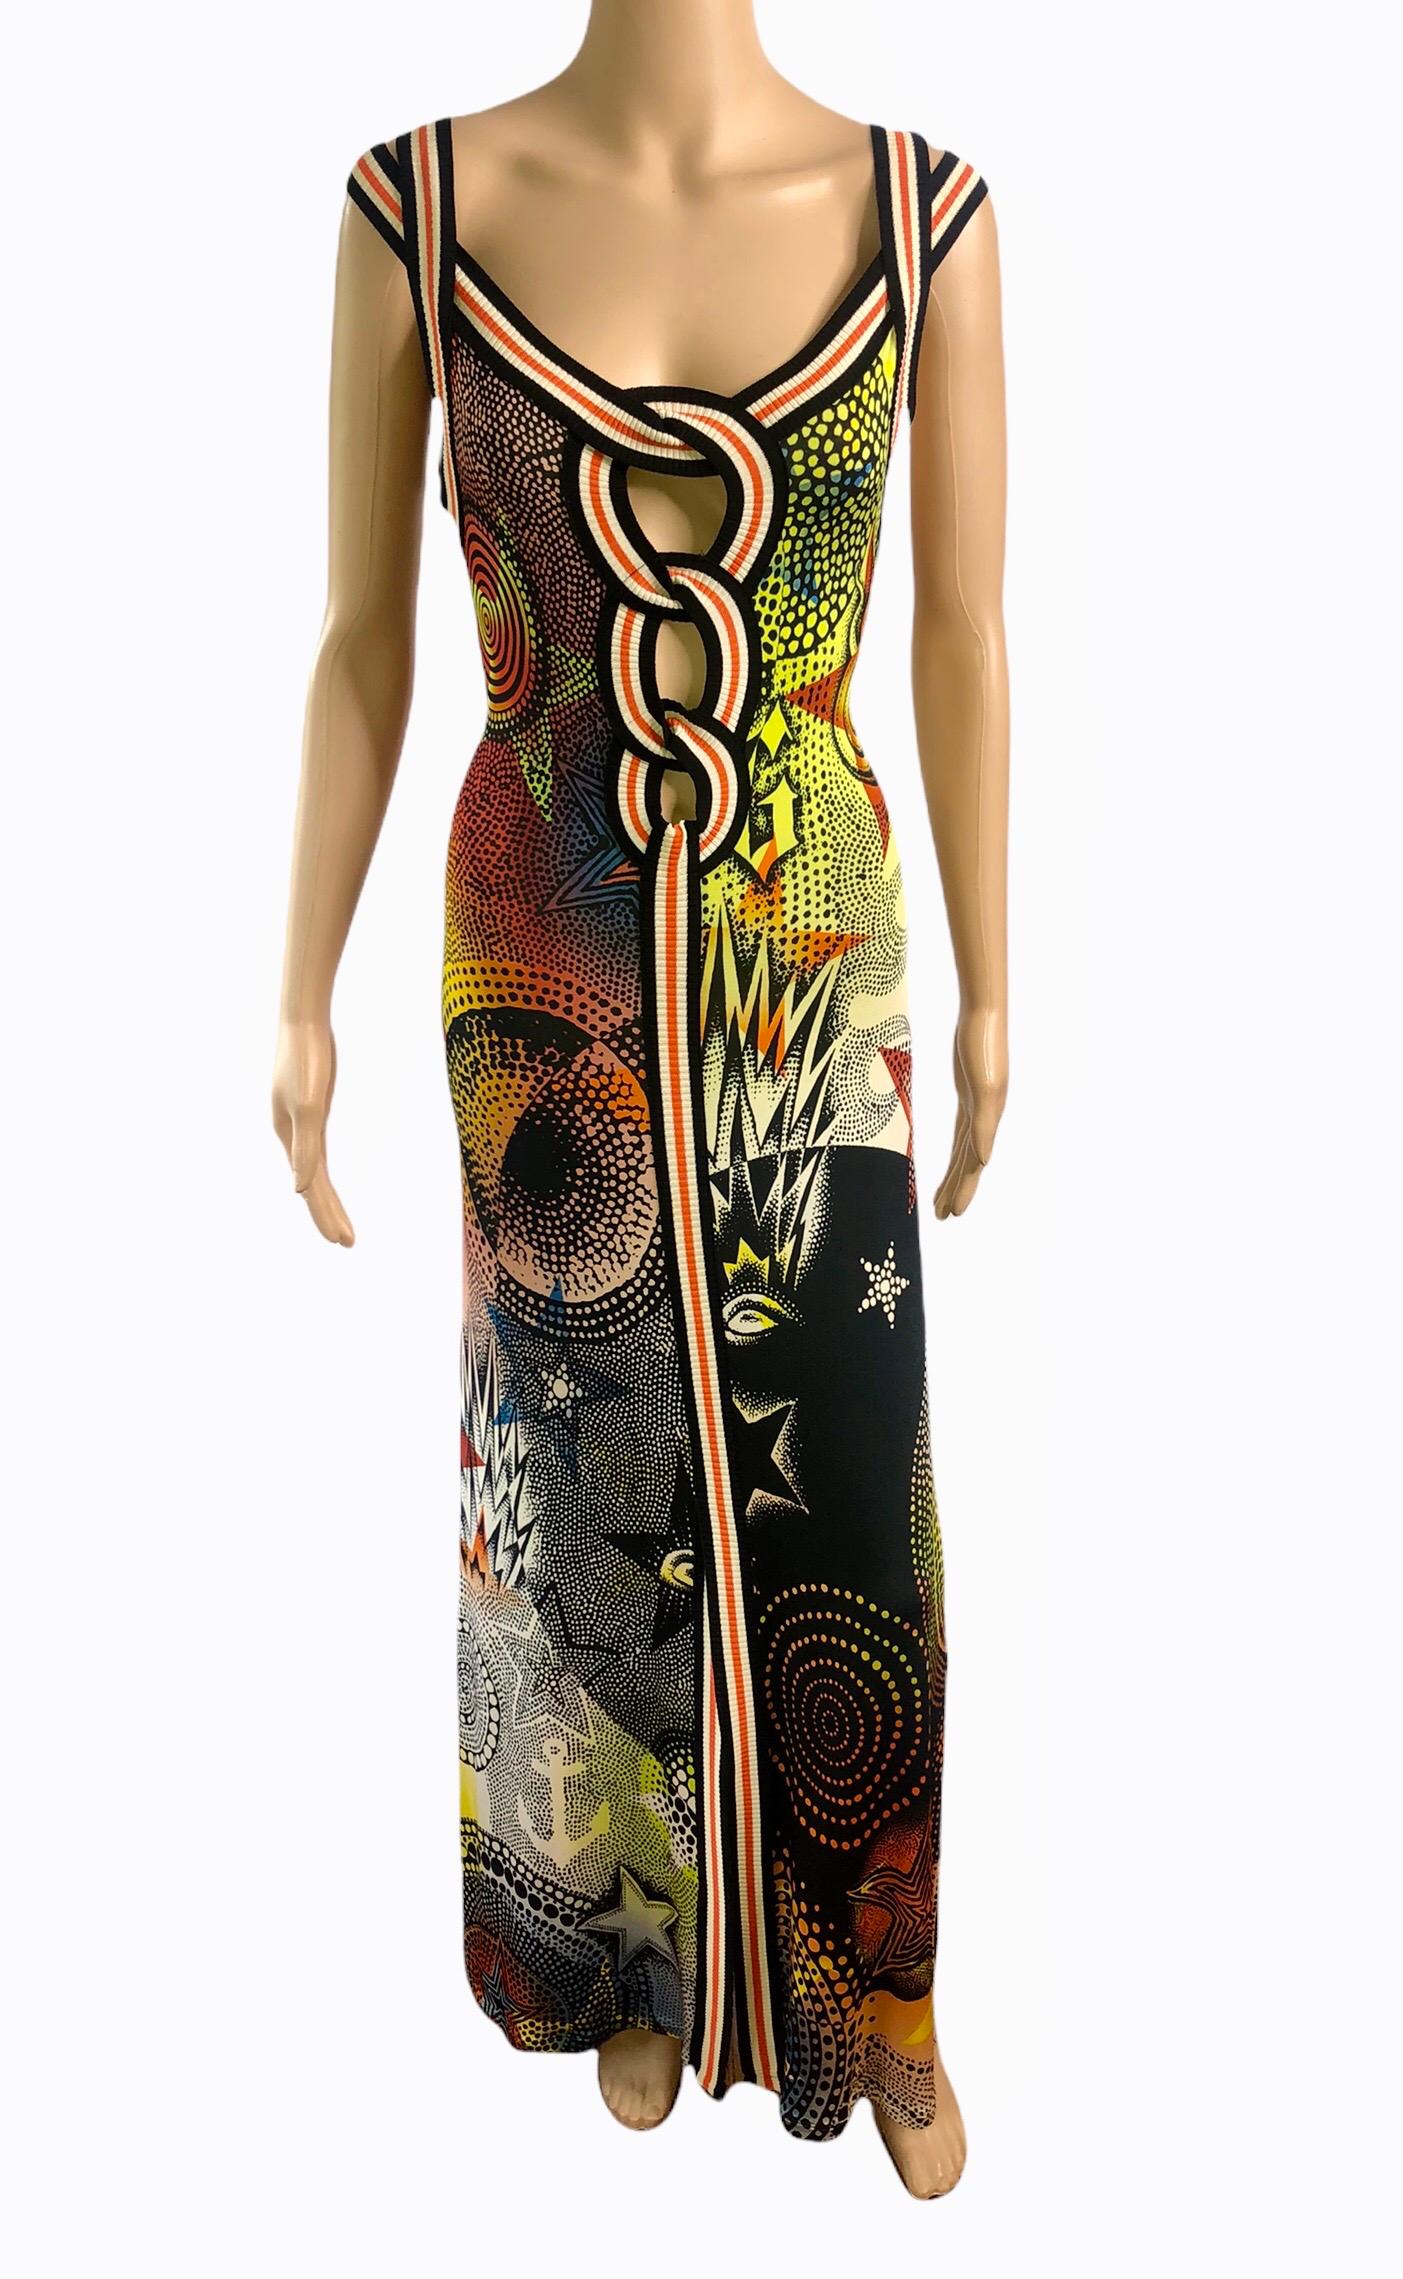 Jean Paul Gaultier S/S 2007 Star Print Cutout Bodycon Maxi Dress

Please note this dress is very versatile and could be worn with the cutouts in front or back based on preference. Please note size tag has been removed due to stretchy material this